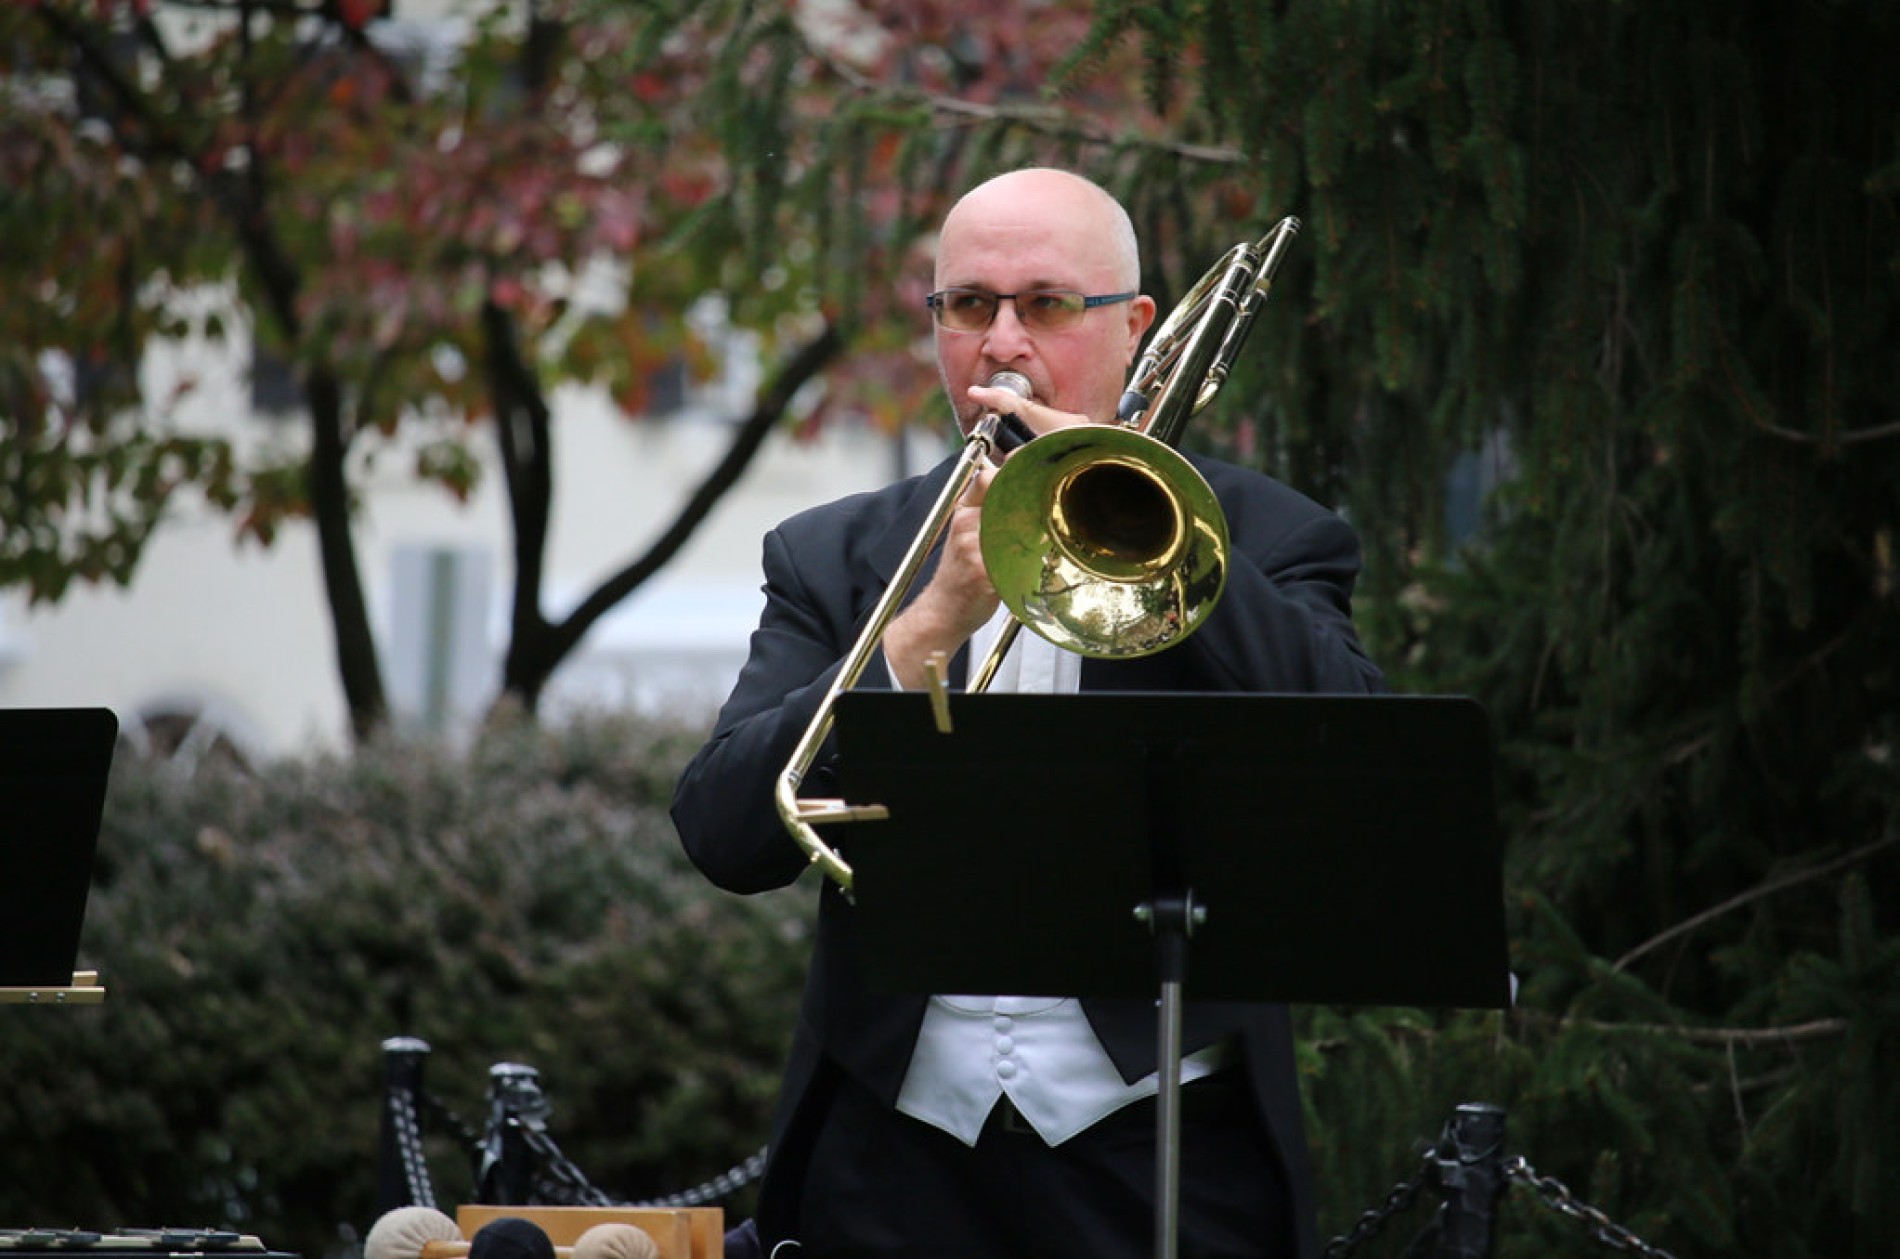 Trombone player performing outside, surrounded by trees.